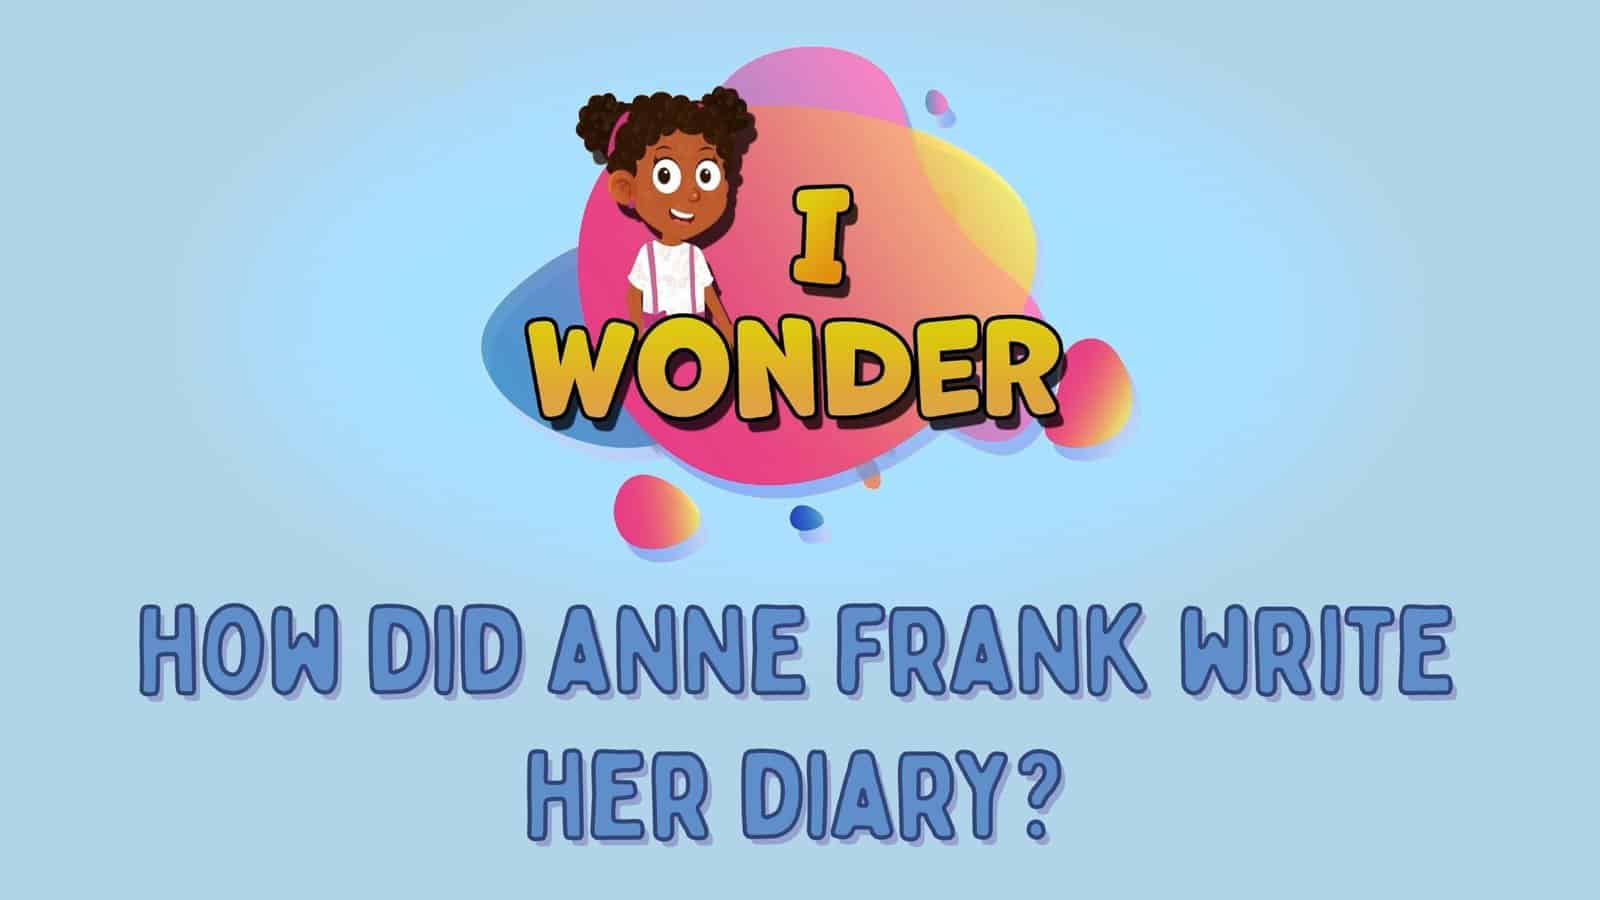 How Did Anne Frank Write Her Diary?